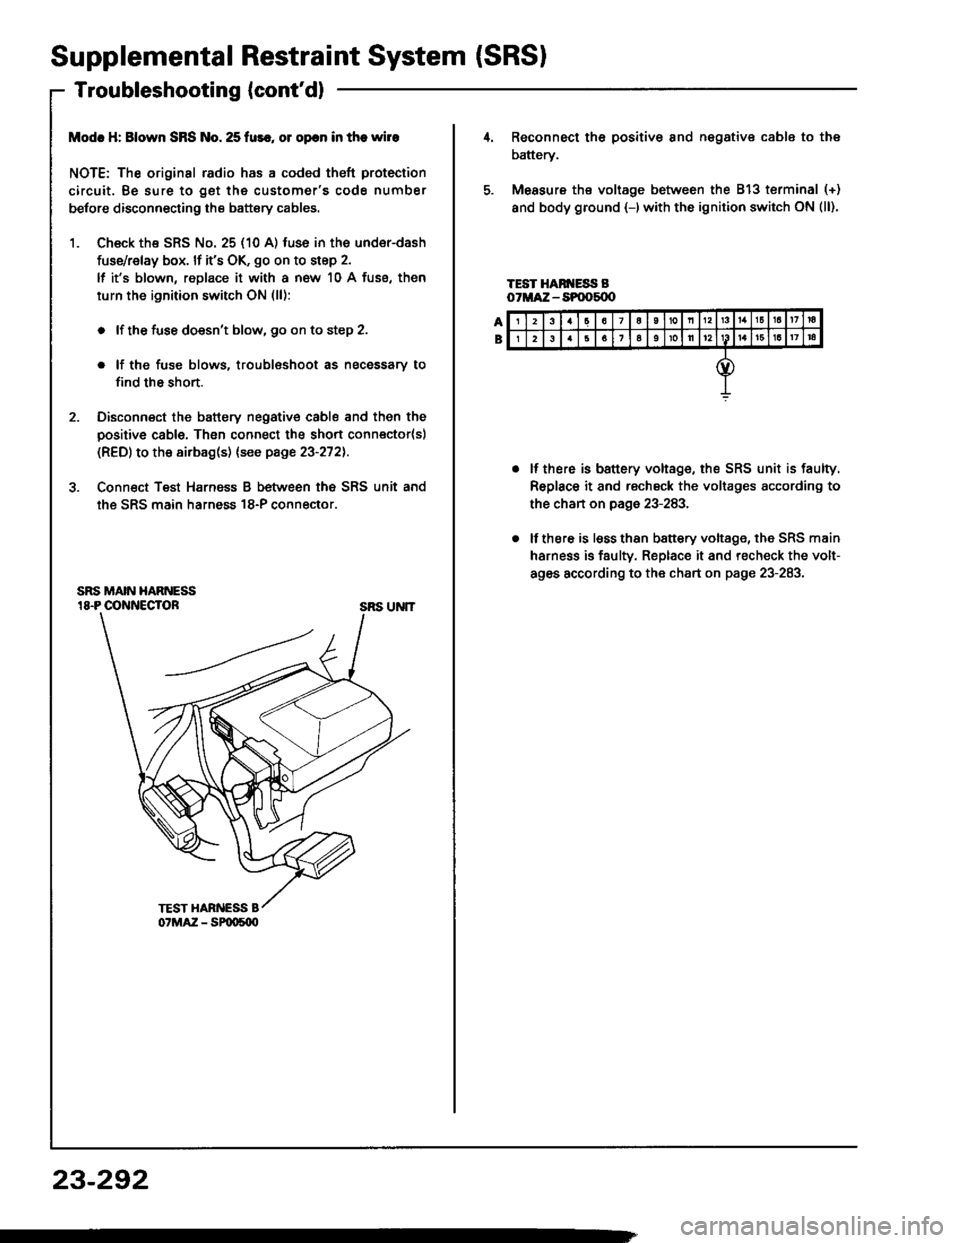 HONDA INTEGRA 1994 4.G Workshop Manual Supplemental Restraint System (SRSI
Troubleshooting {contdl
Modc H: Blown SRS No. 25 fur., ol opcn in the wire
NOTE: The original radio has a coded theft protection
circuit. Be sure to get the custom